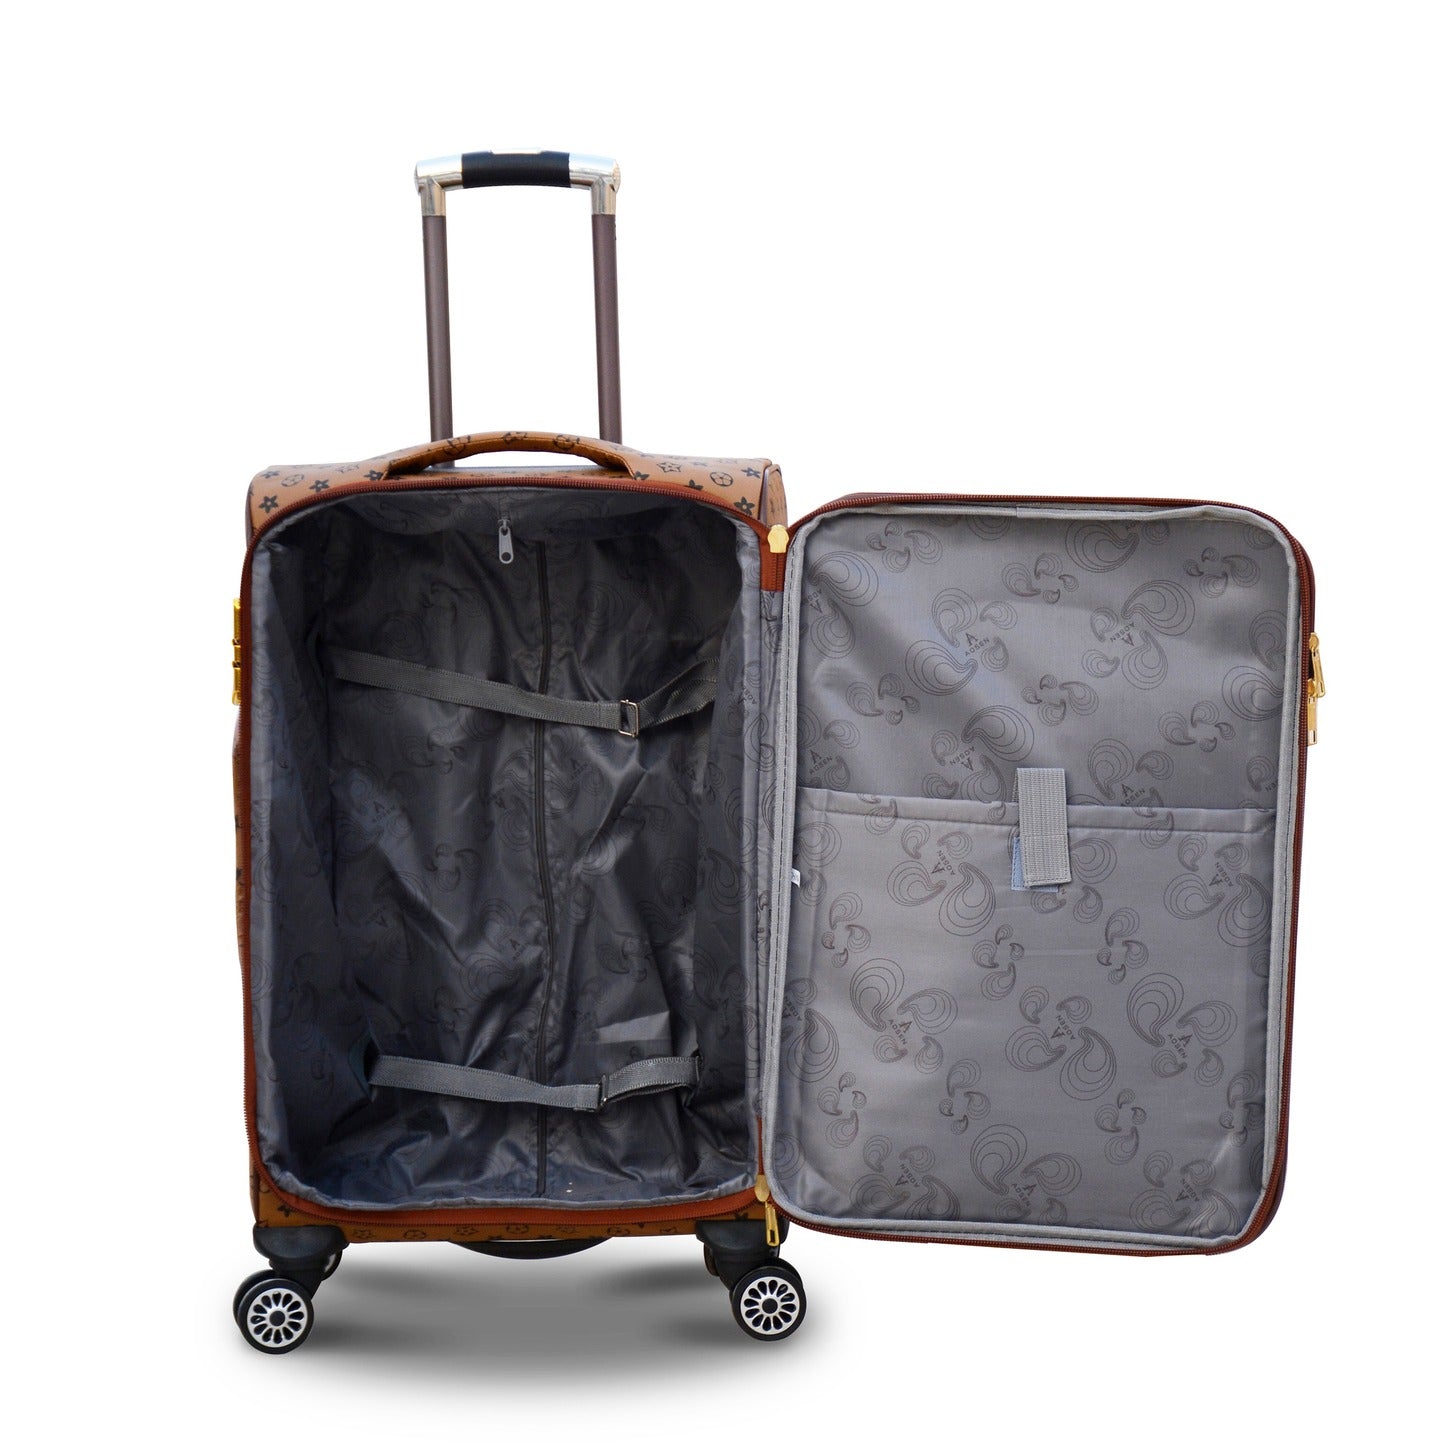 24" Light Brown Colour LVR PU Leather Luggage Lightweight Trolley Bag with Spinner Wheel